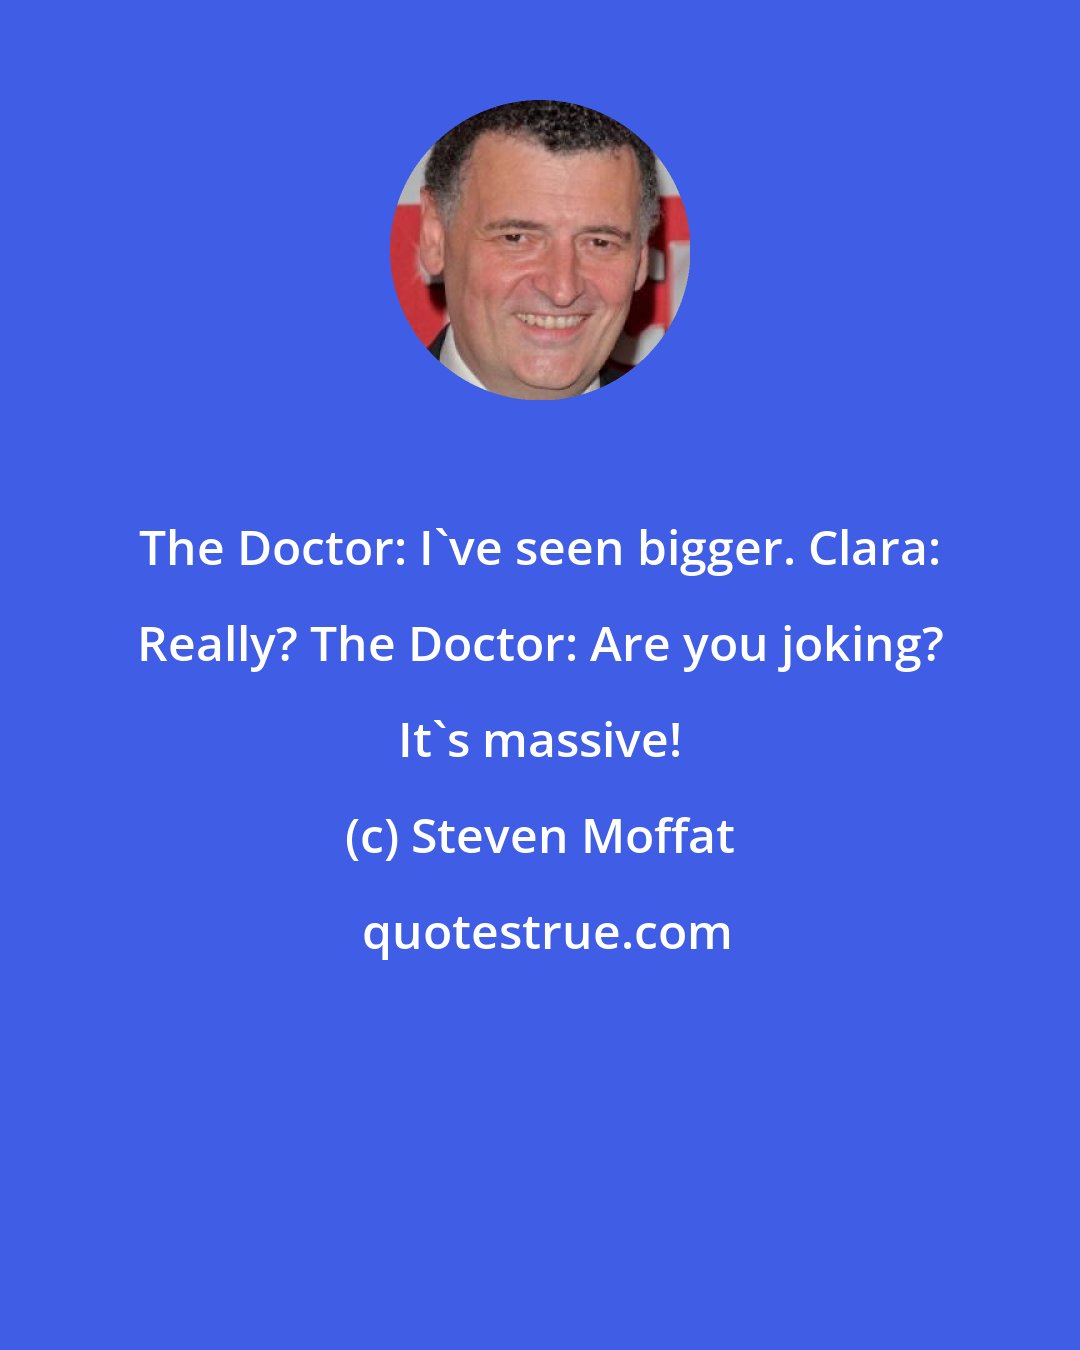 Steven Moffat: The Doctor: I've seen bigger. Clara: Really? The Doctor: Are you joking? It's massive!